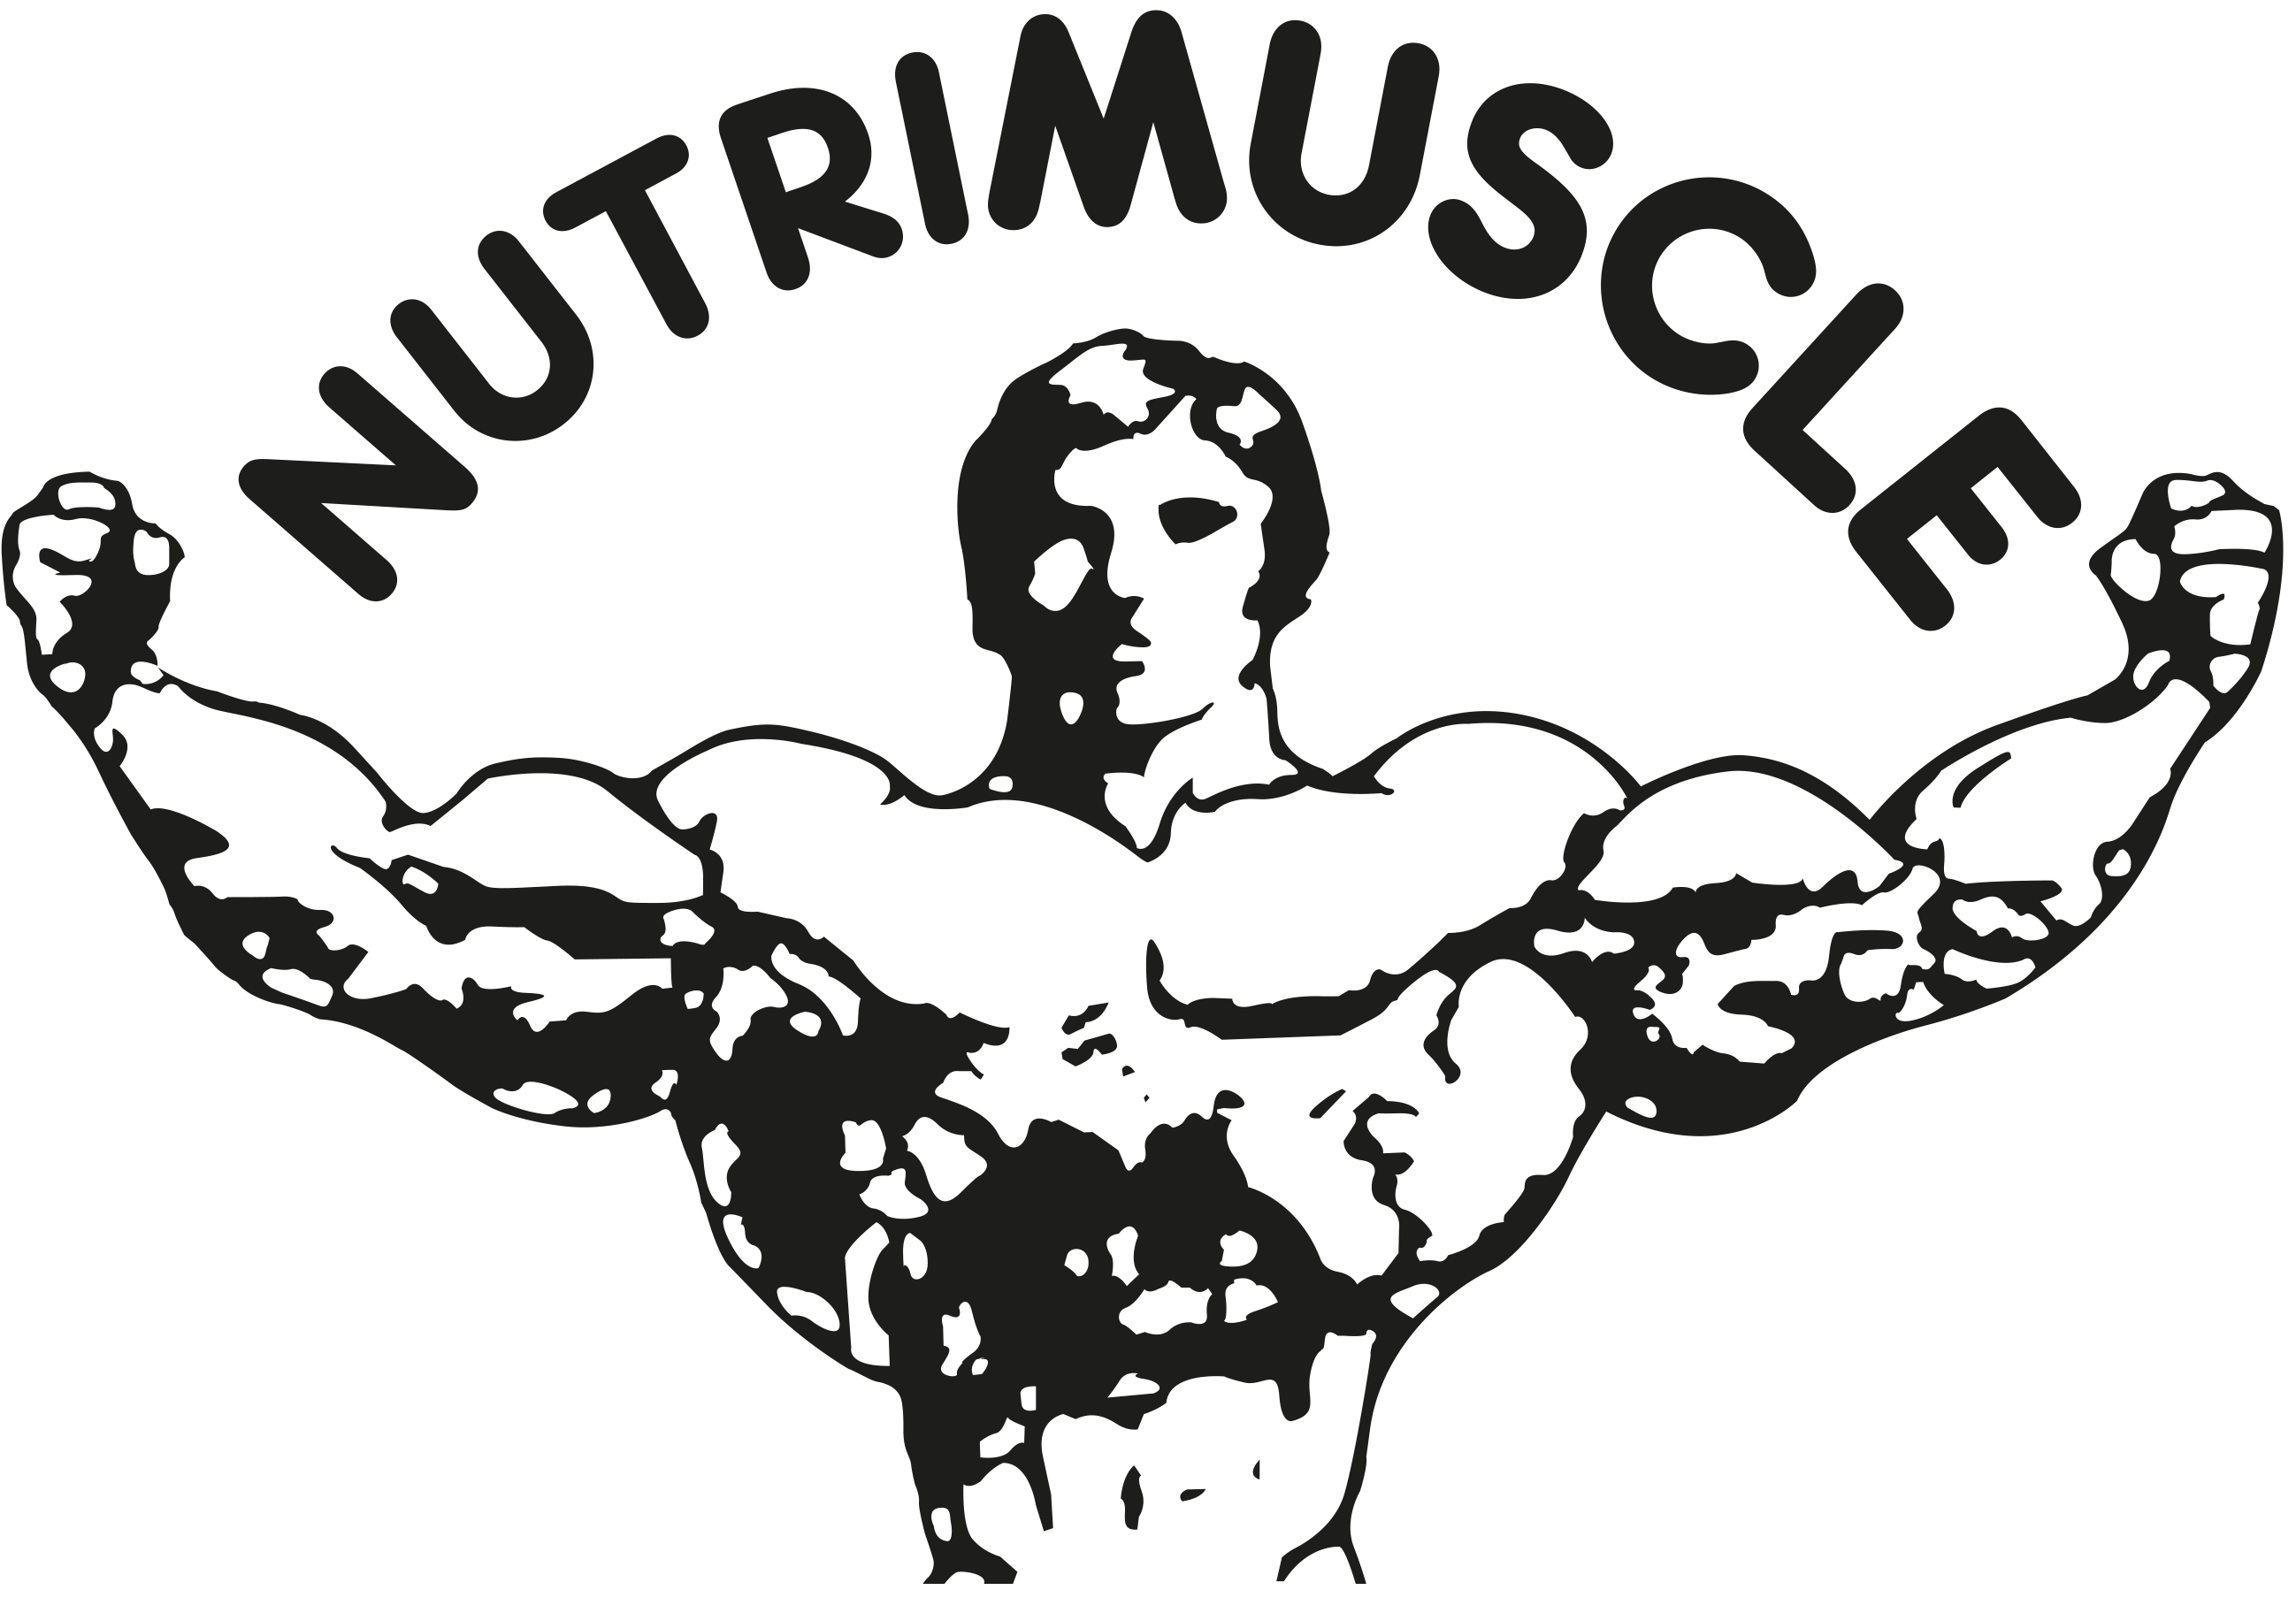 26 years already. Nutrimuscle, the fight continues